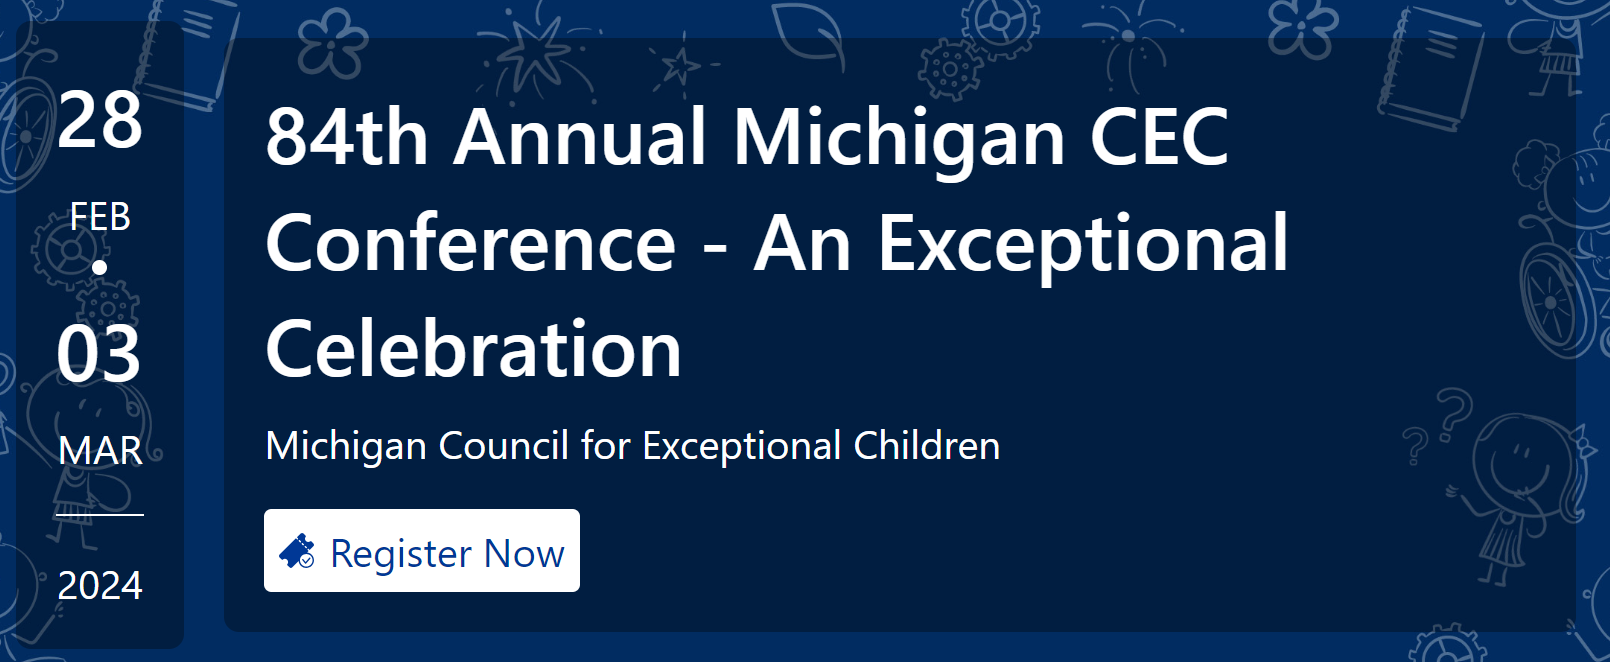 84th Annual Michigan CEC Conference - An Exceptional Celebration